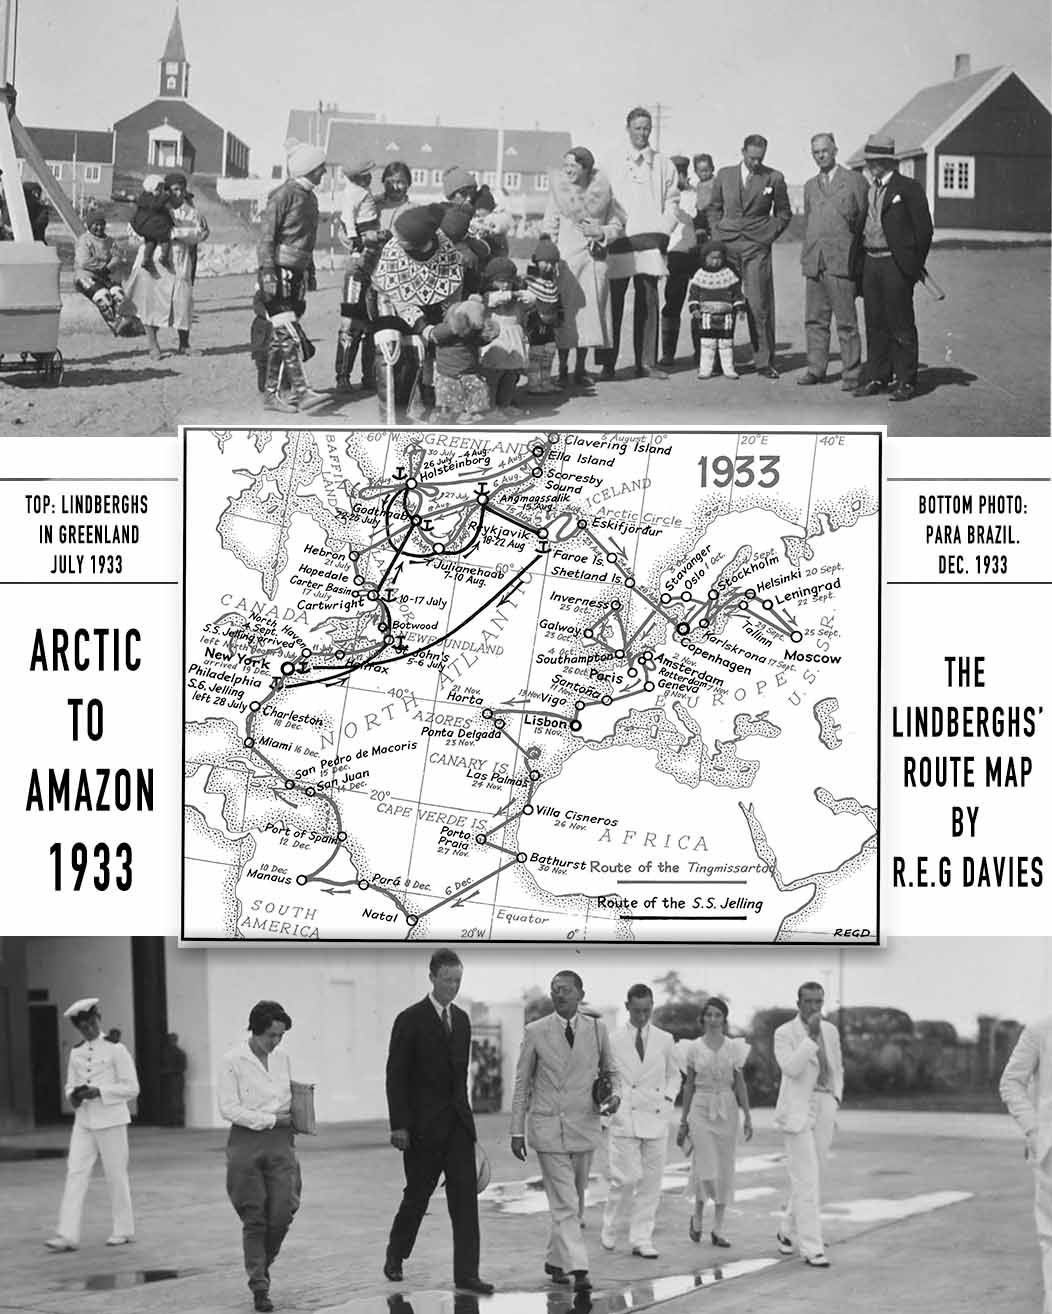 Atlantic Epic 1933 - The Lindbergh's Survey Flight from Greenland to the Amazon